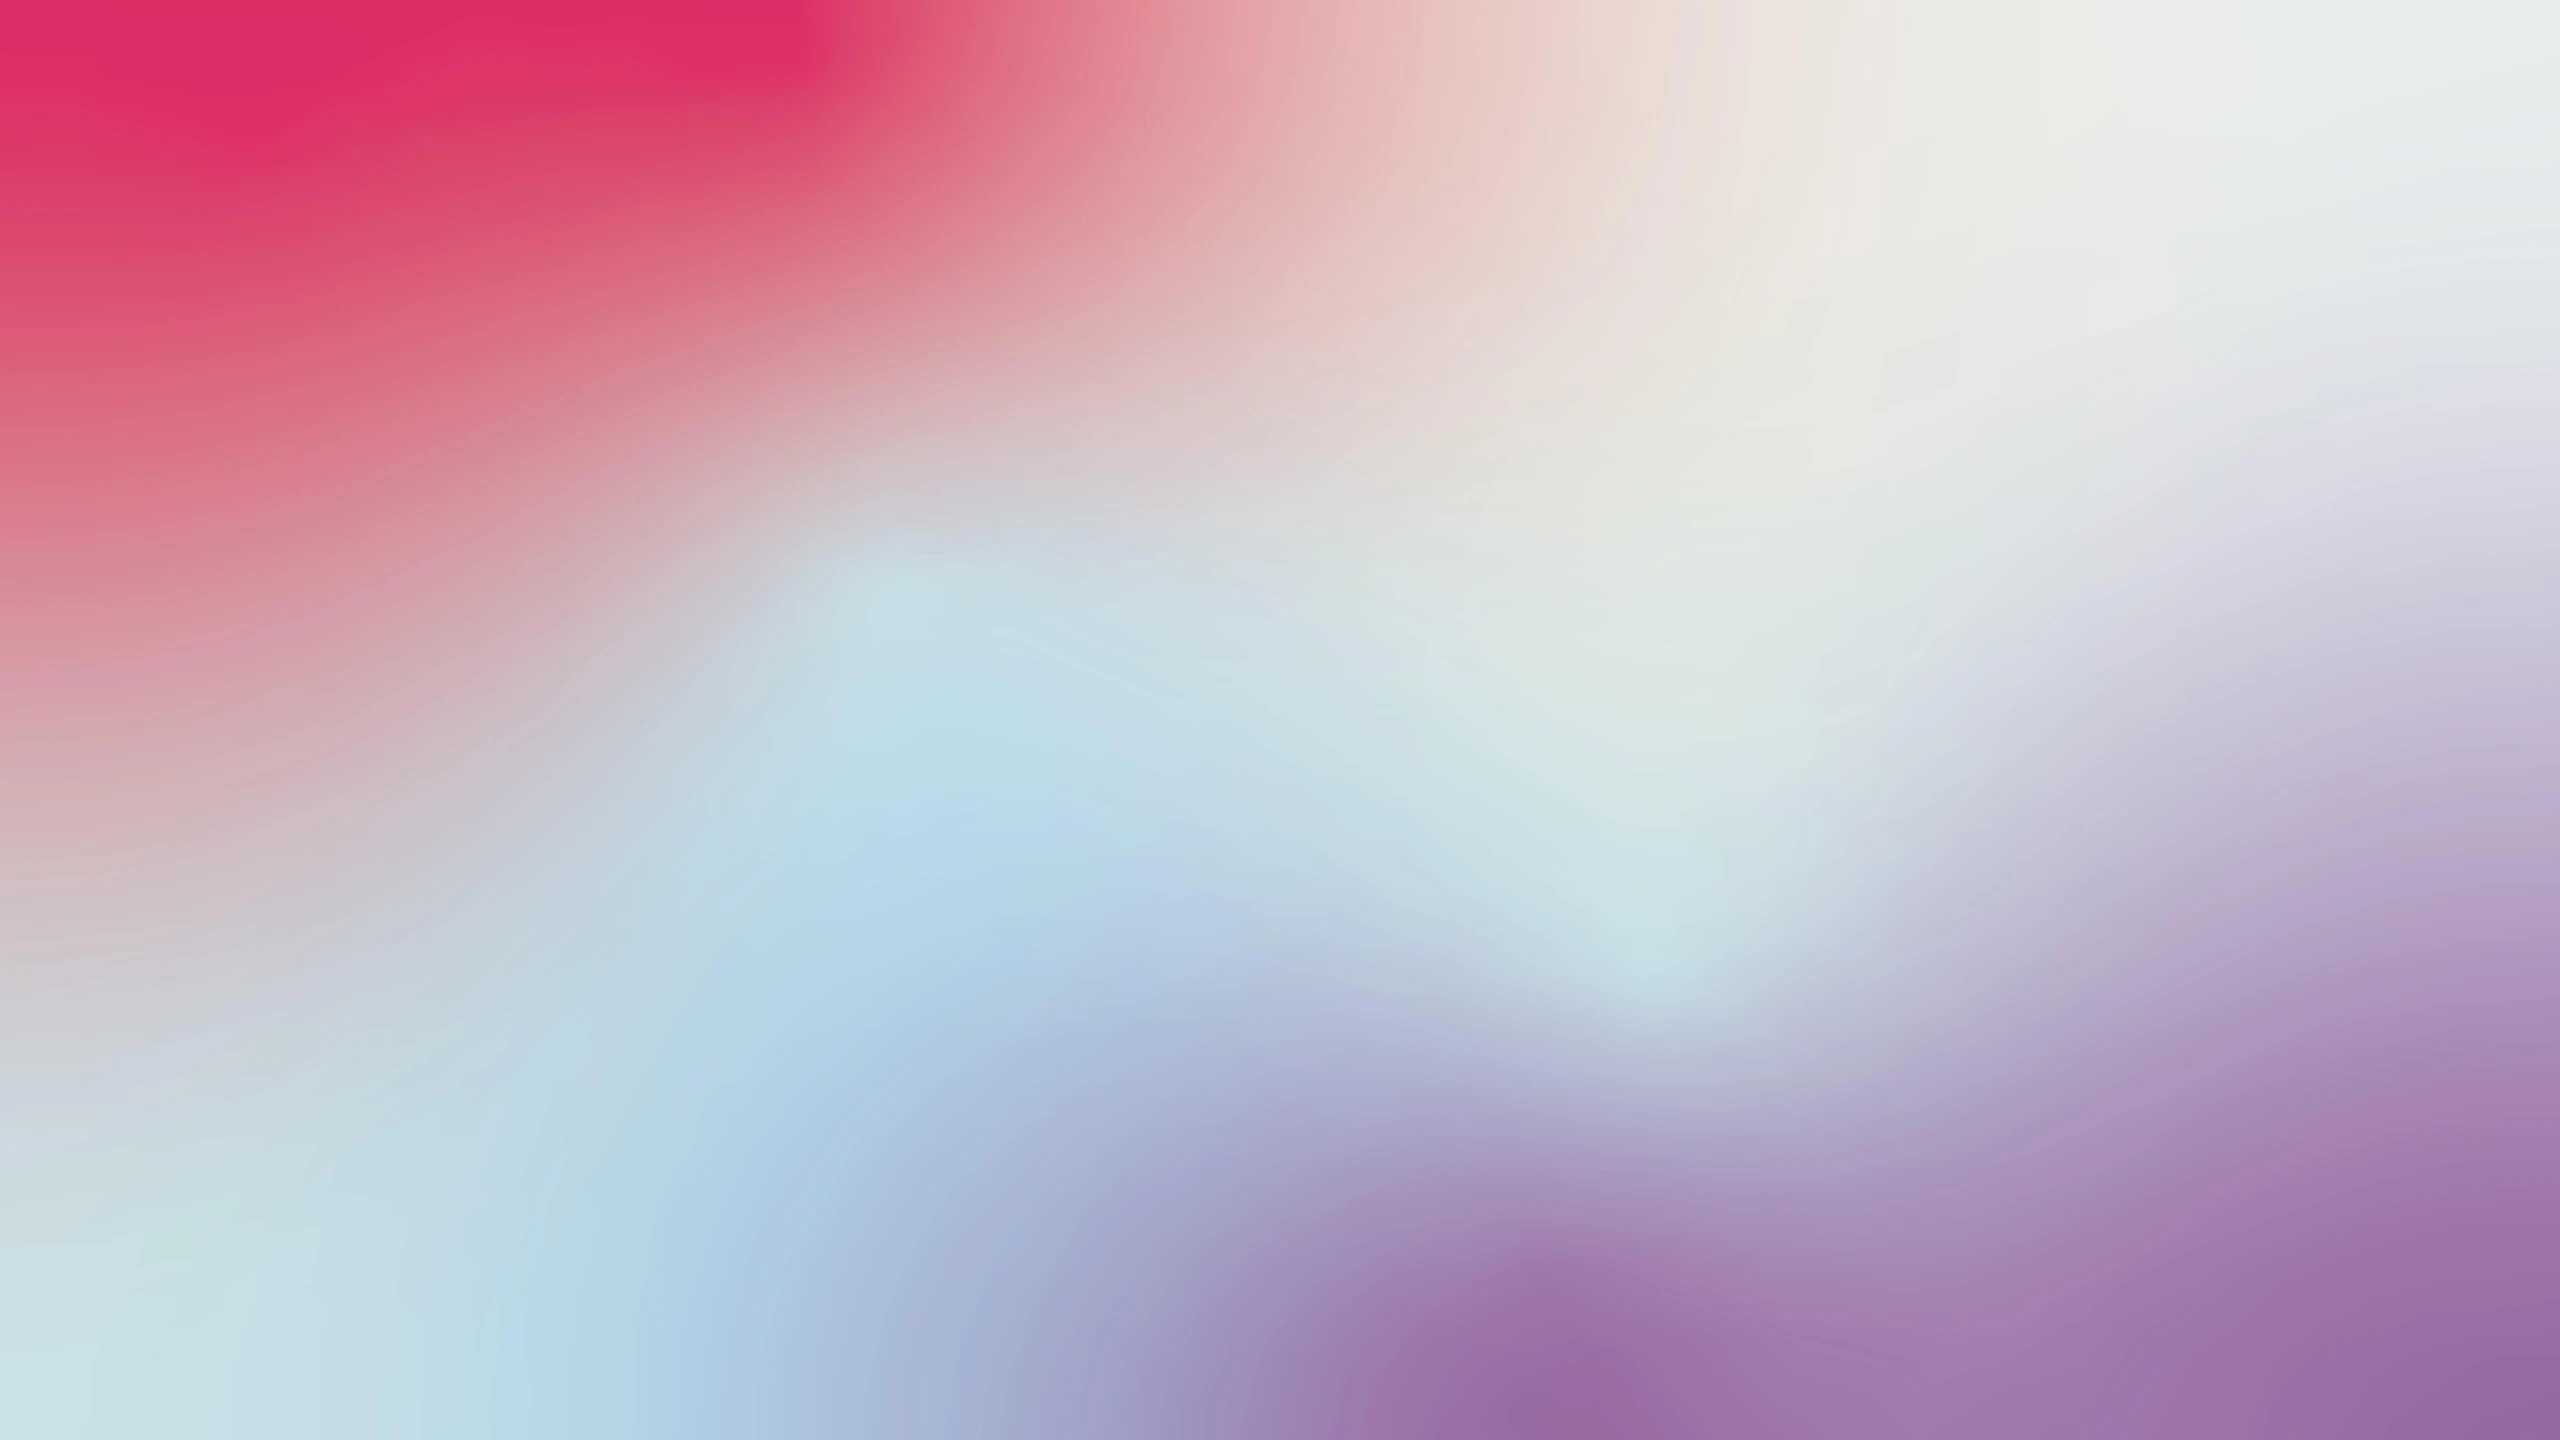 a close up of a cell phone with a blurry background, an album cover, by Anna Füssli, color field, magenta and crimson and cyan, simple white background, purple fog, vector background